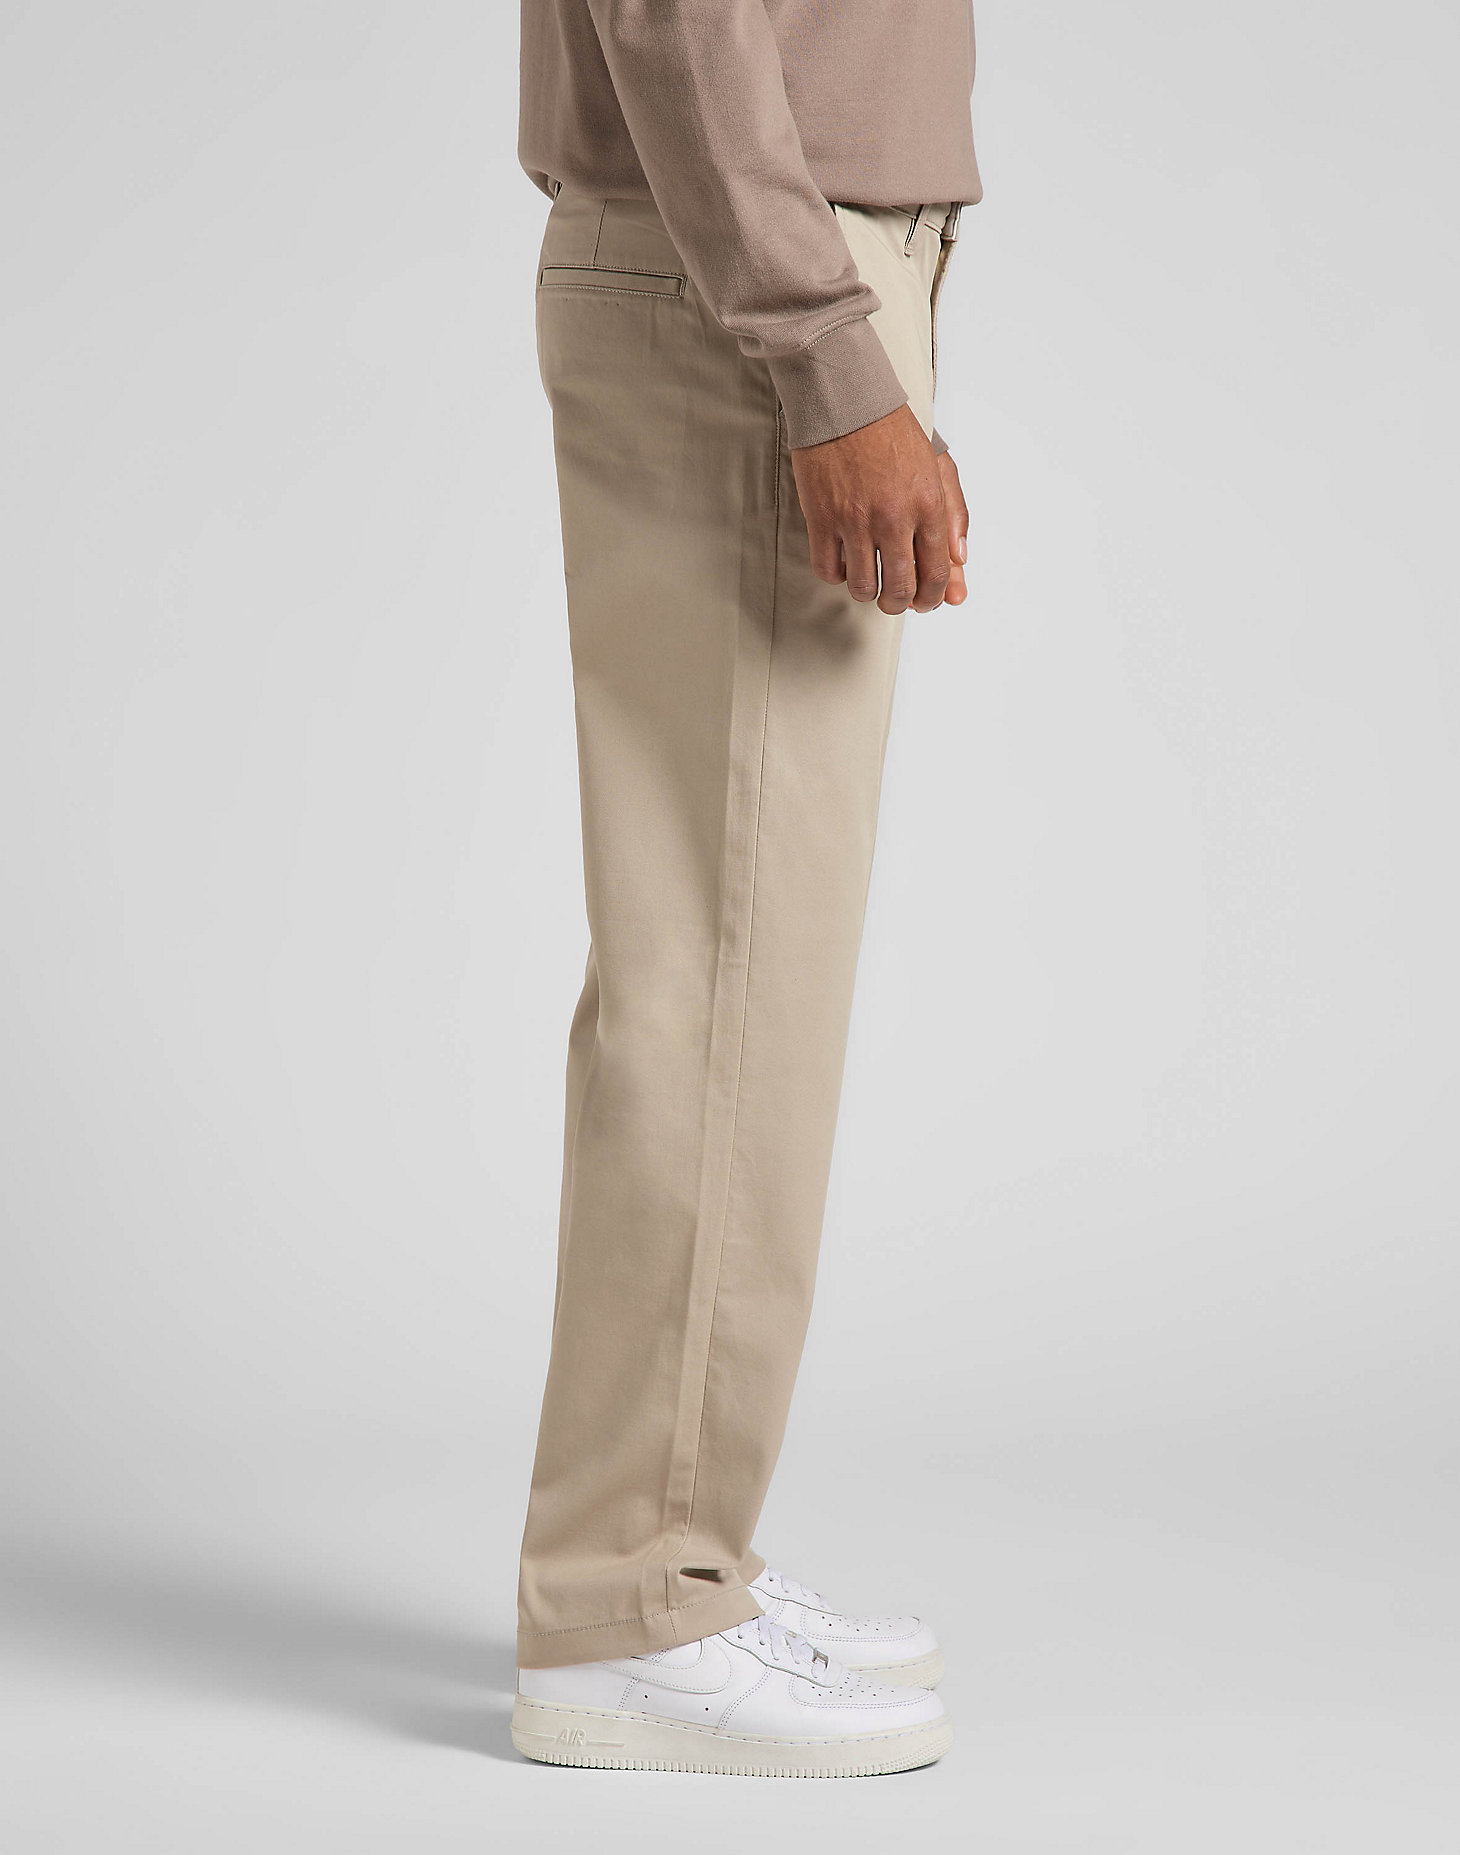 Relaxed Chino in Stone alternative view 3